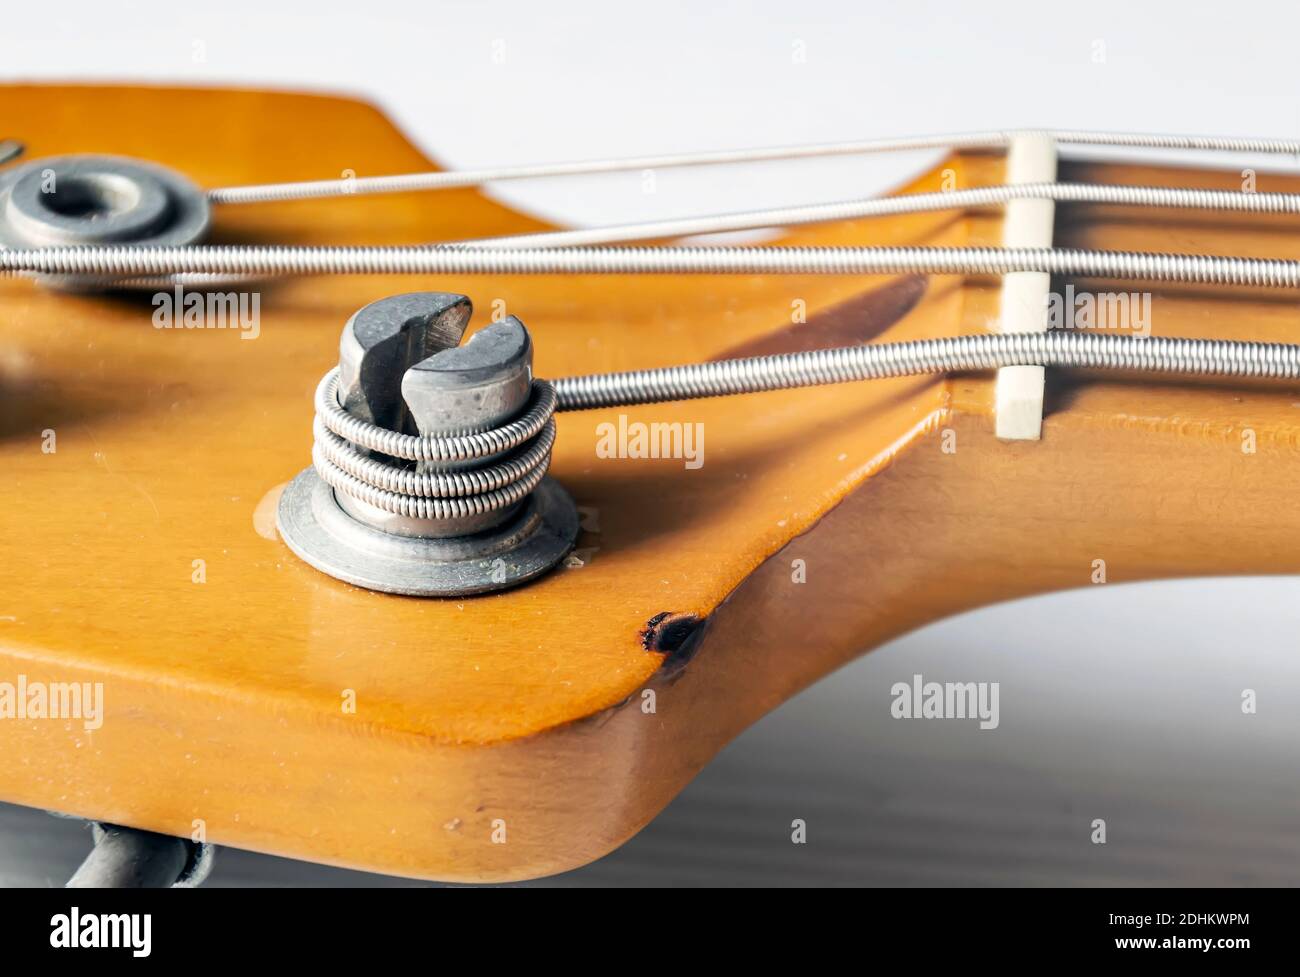 Detail of a tuning post on the wooden headstock of an electric bass guitar. Musical instruments and mechanics for string tuning. Stock Photo